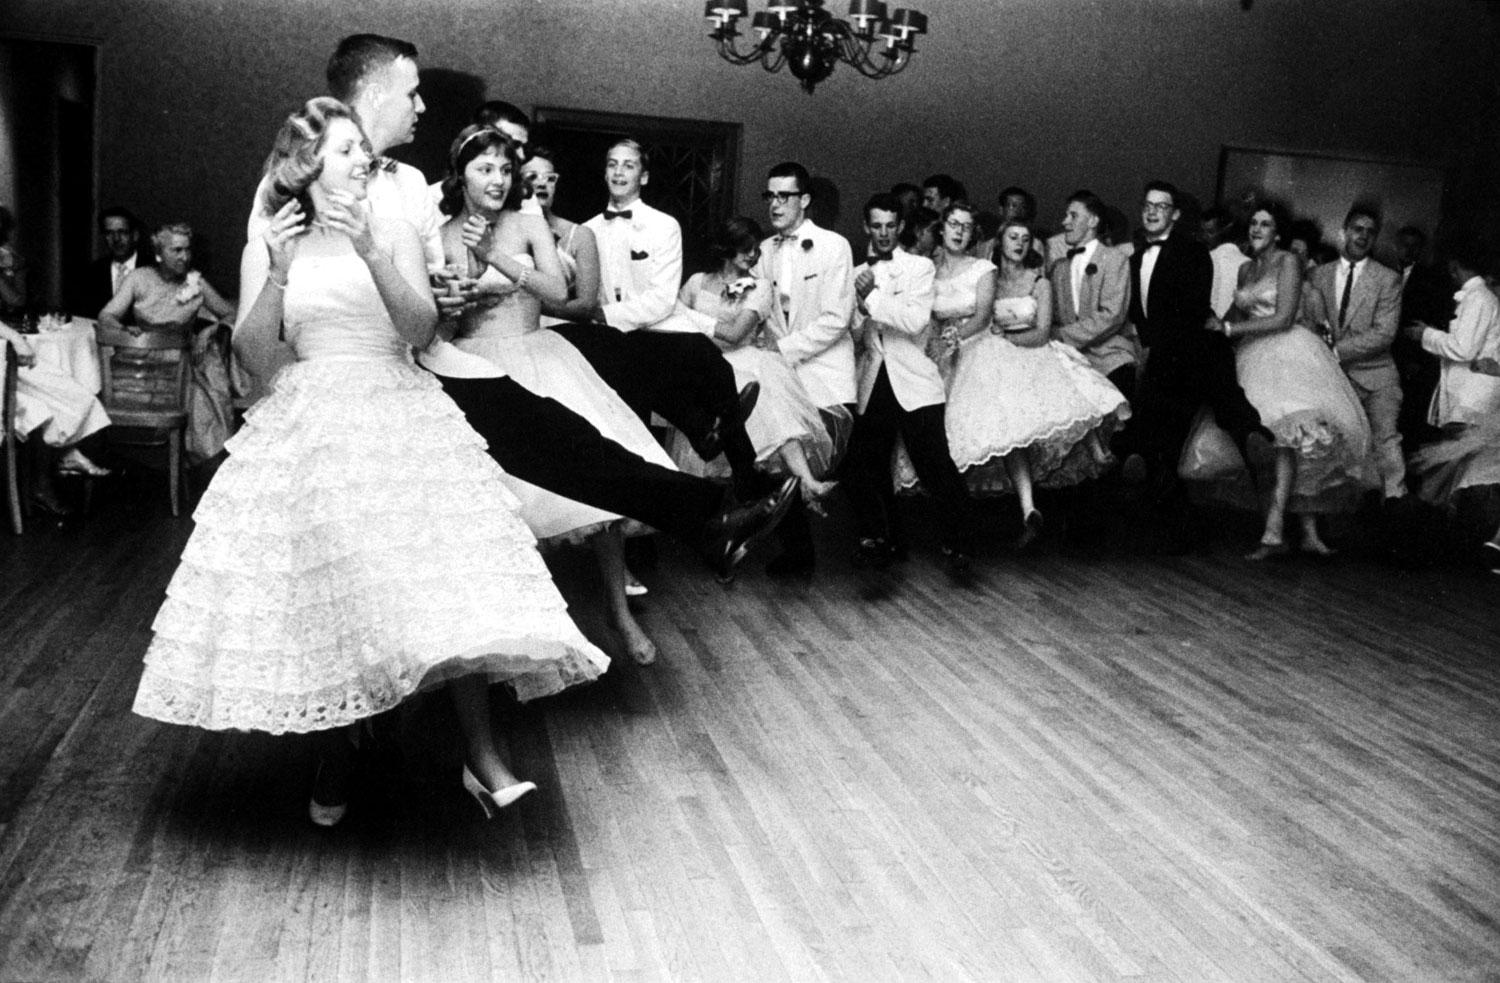 Imagine if we danced like this today! (PHOTO BY MILLER).